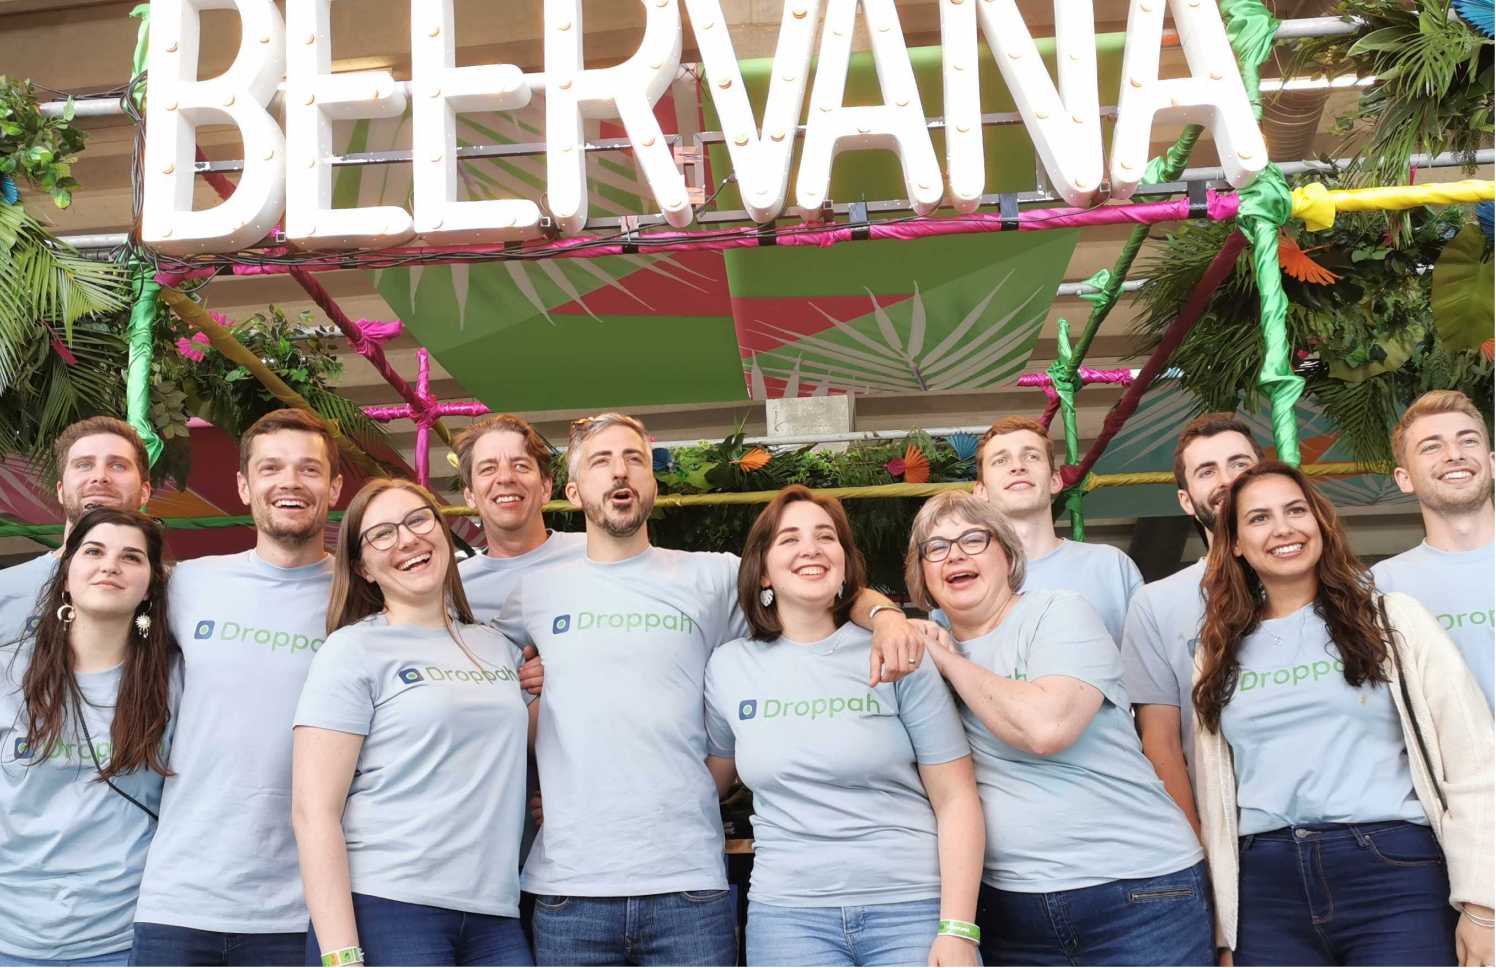 The team at Beervana 2020